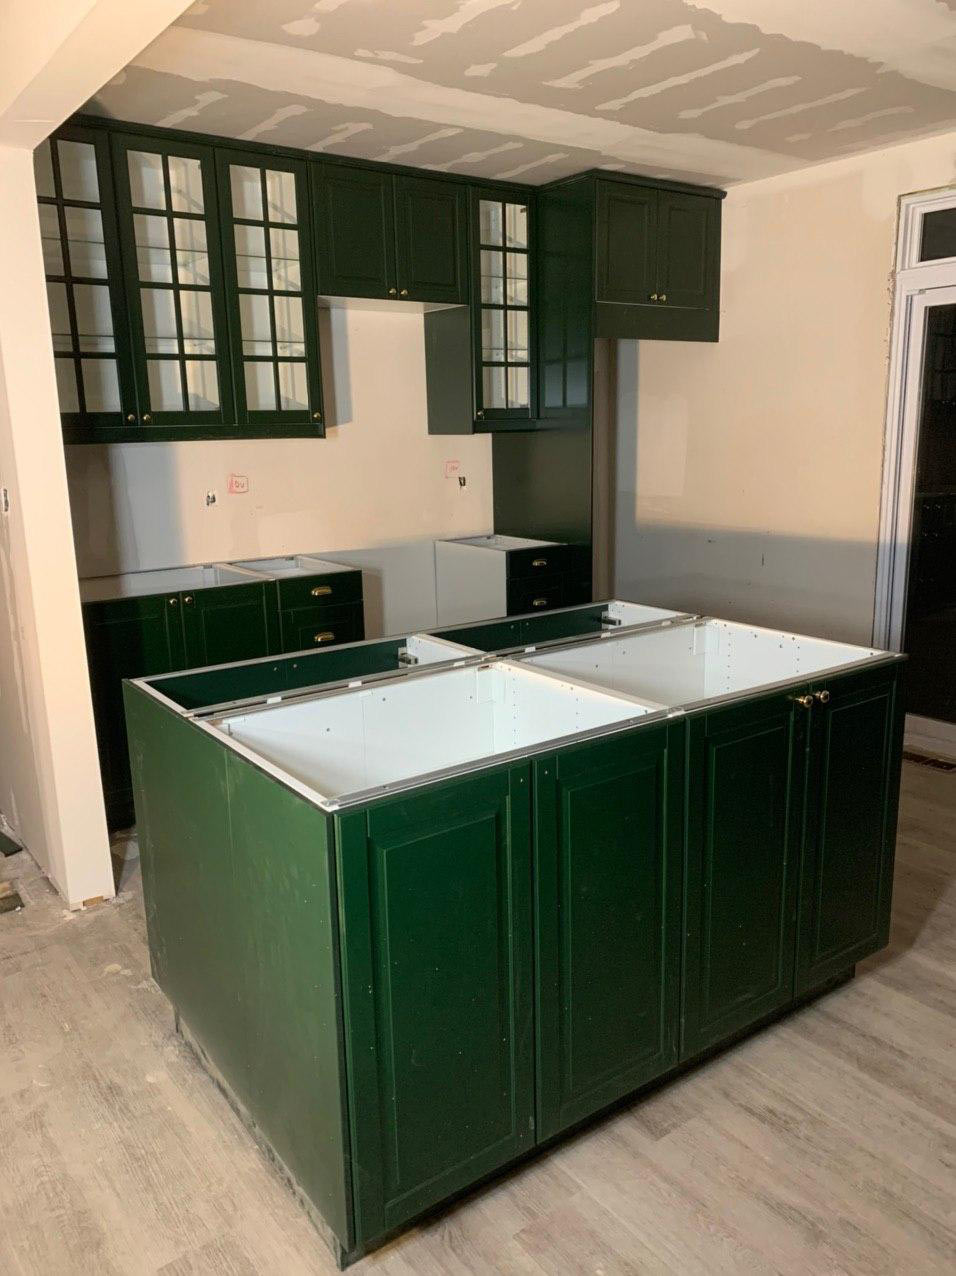 Two parallel wall kitchen 10' long with 5' island. BODBYN green door's style